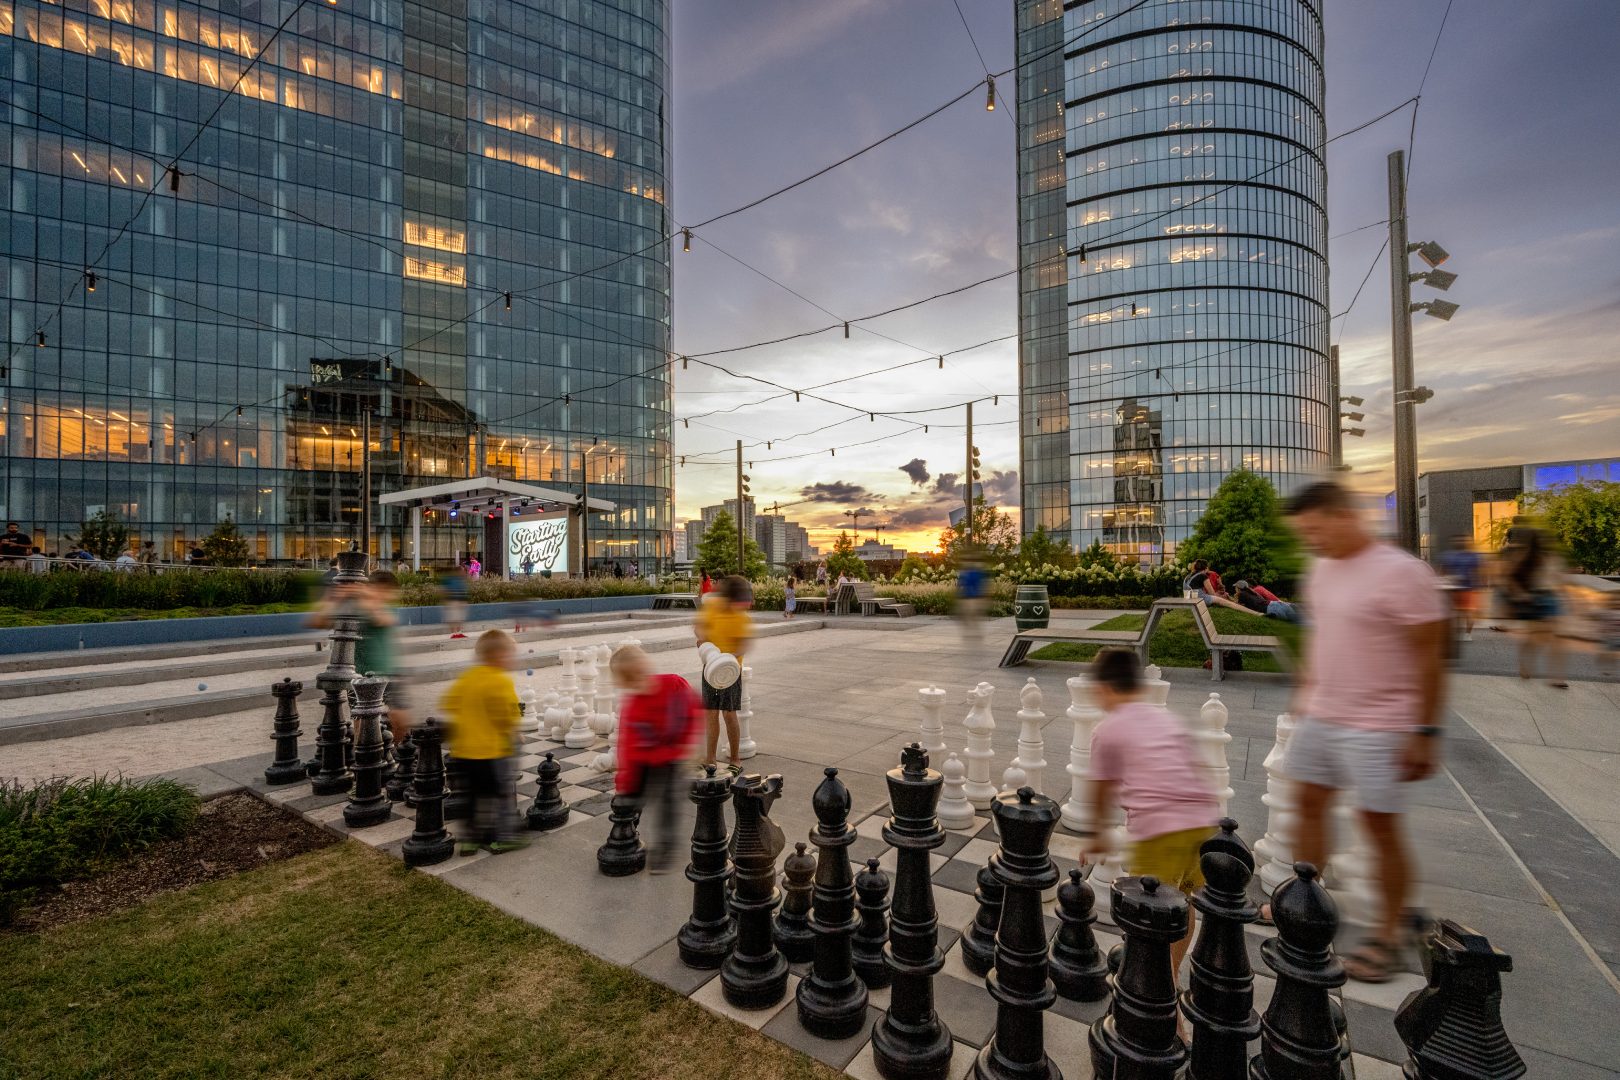 Children and adults enjoy a game of giant chess in the neighborhood plaza surrounding Heming apartments